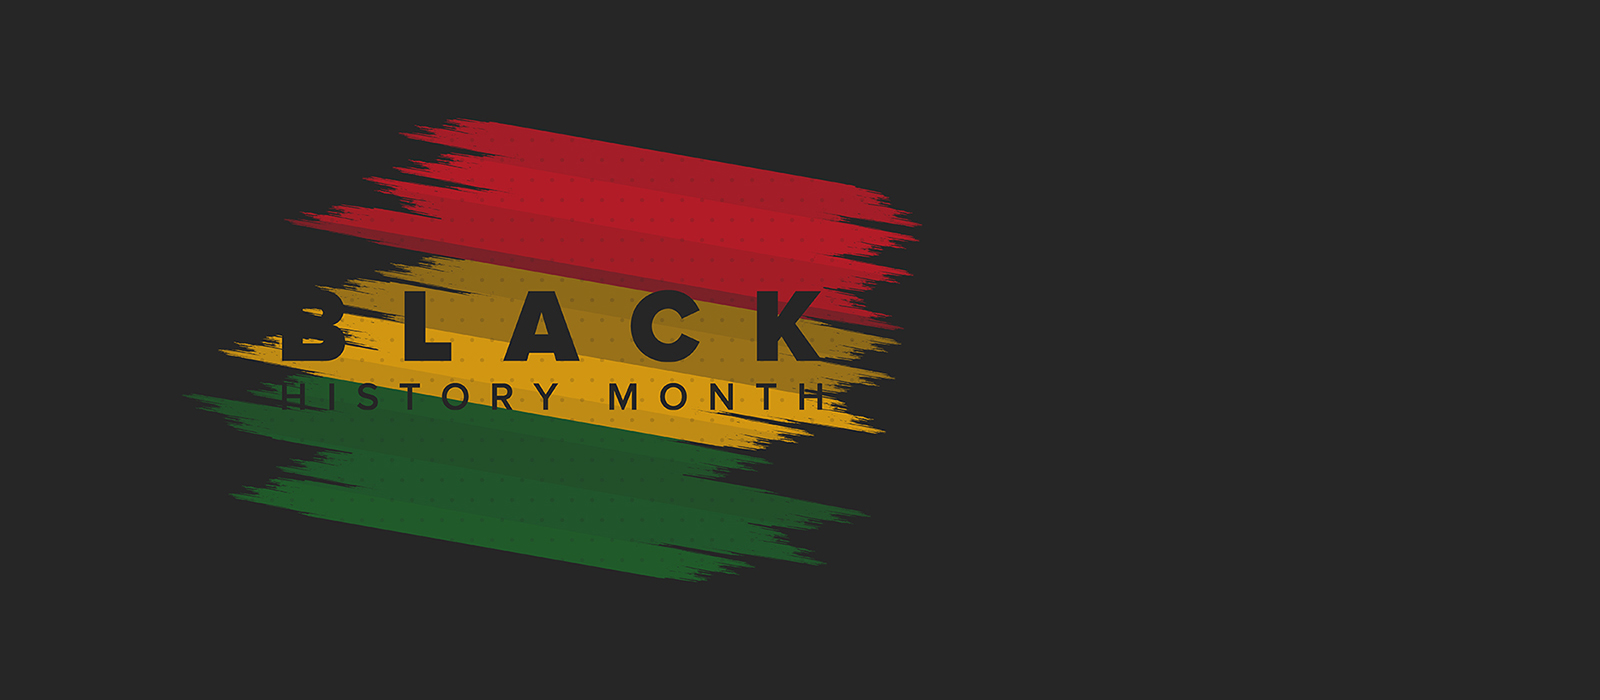 The words 'Black History Month' appears over splashes over colour including red, yellow, and green.